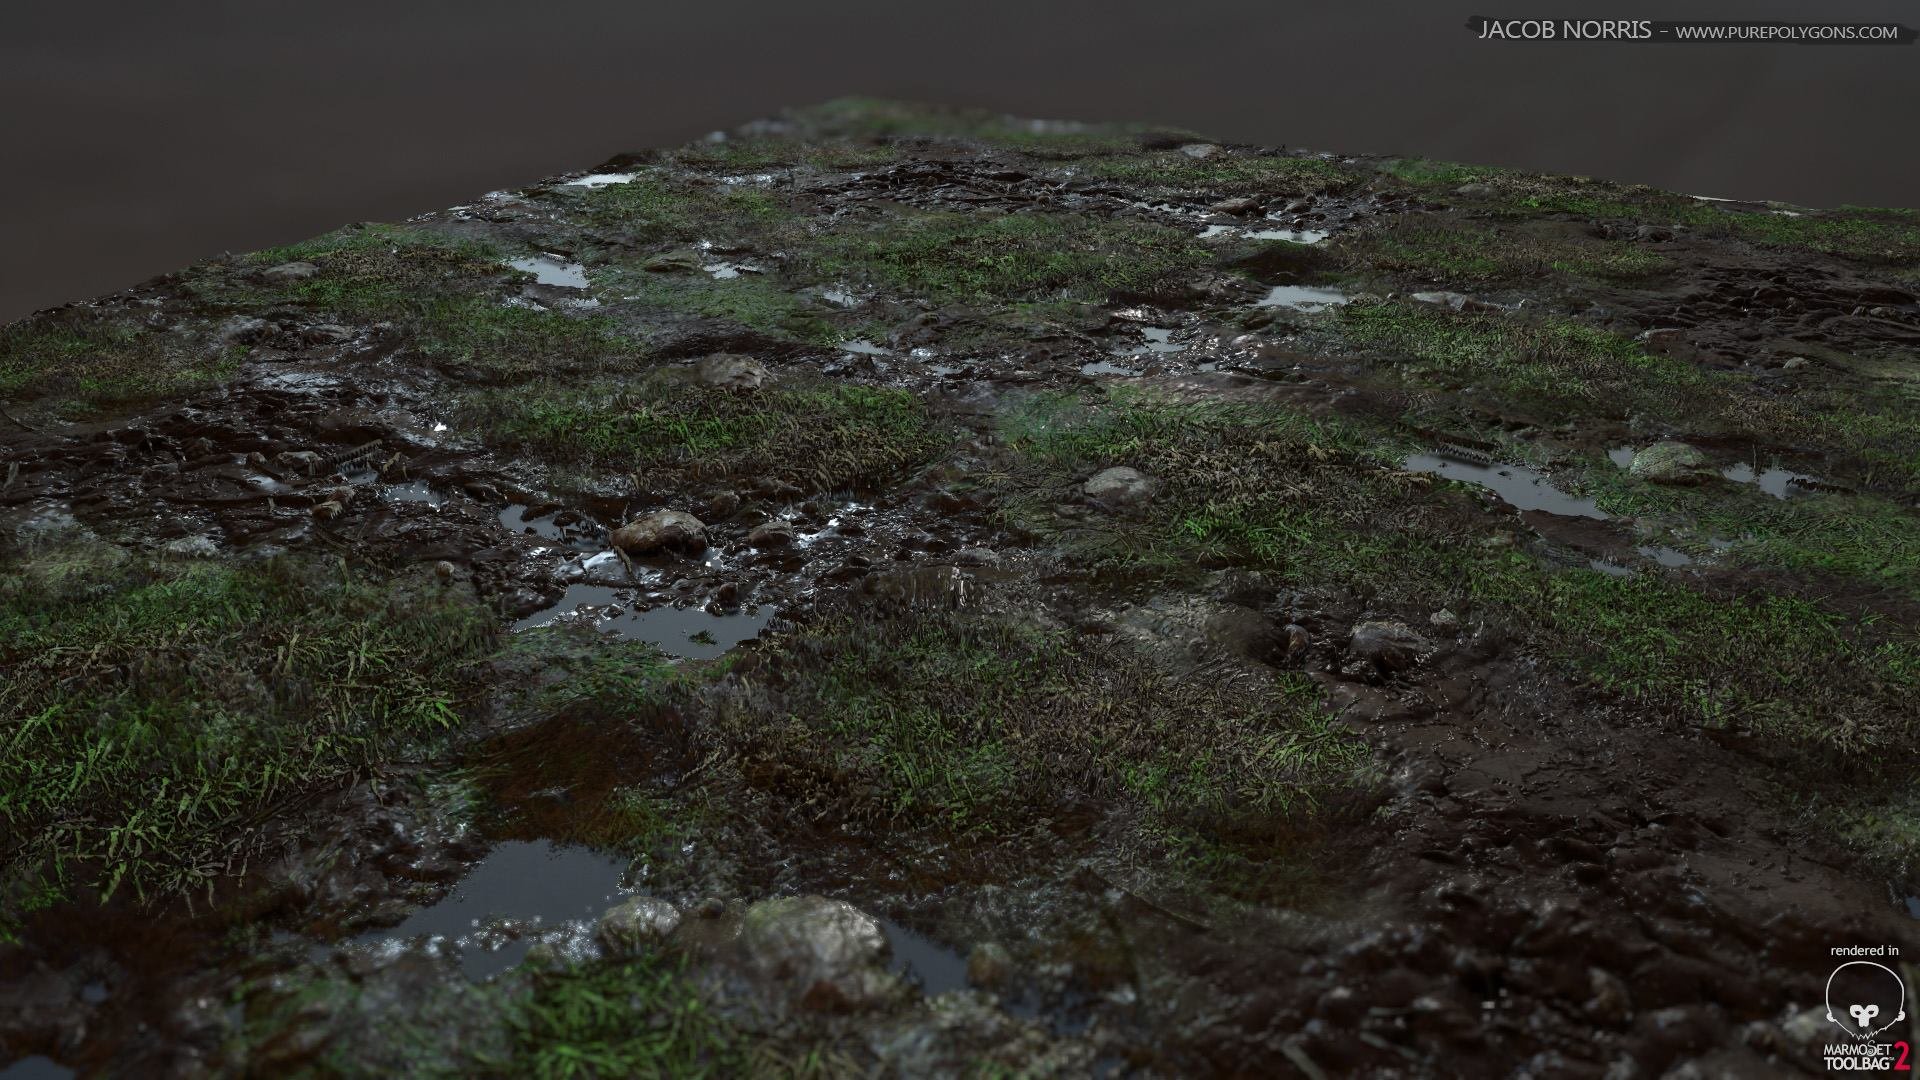 ArtStation - Grass with Rocks and Puddles, Jacob Norris